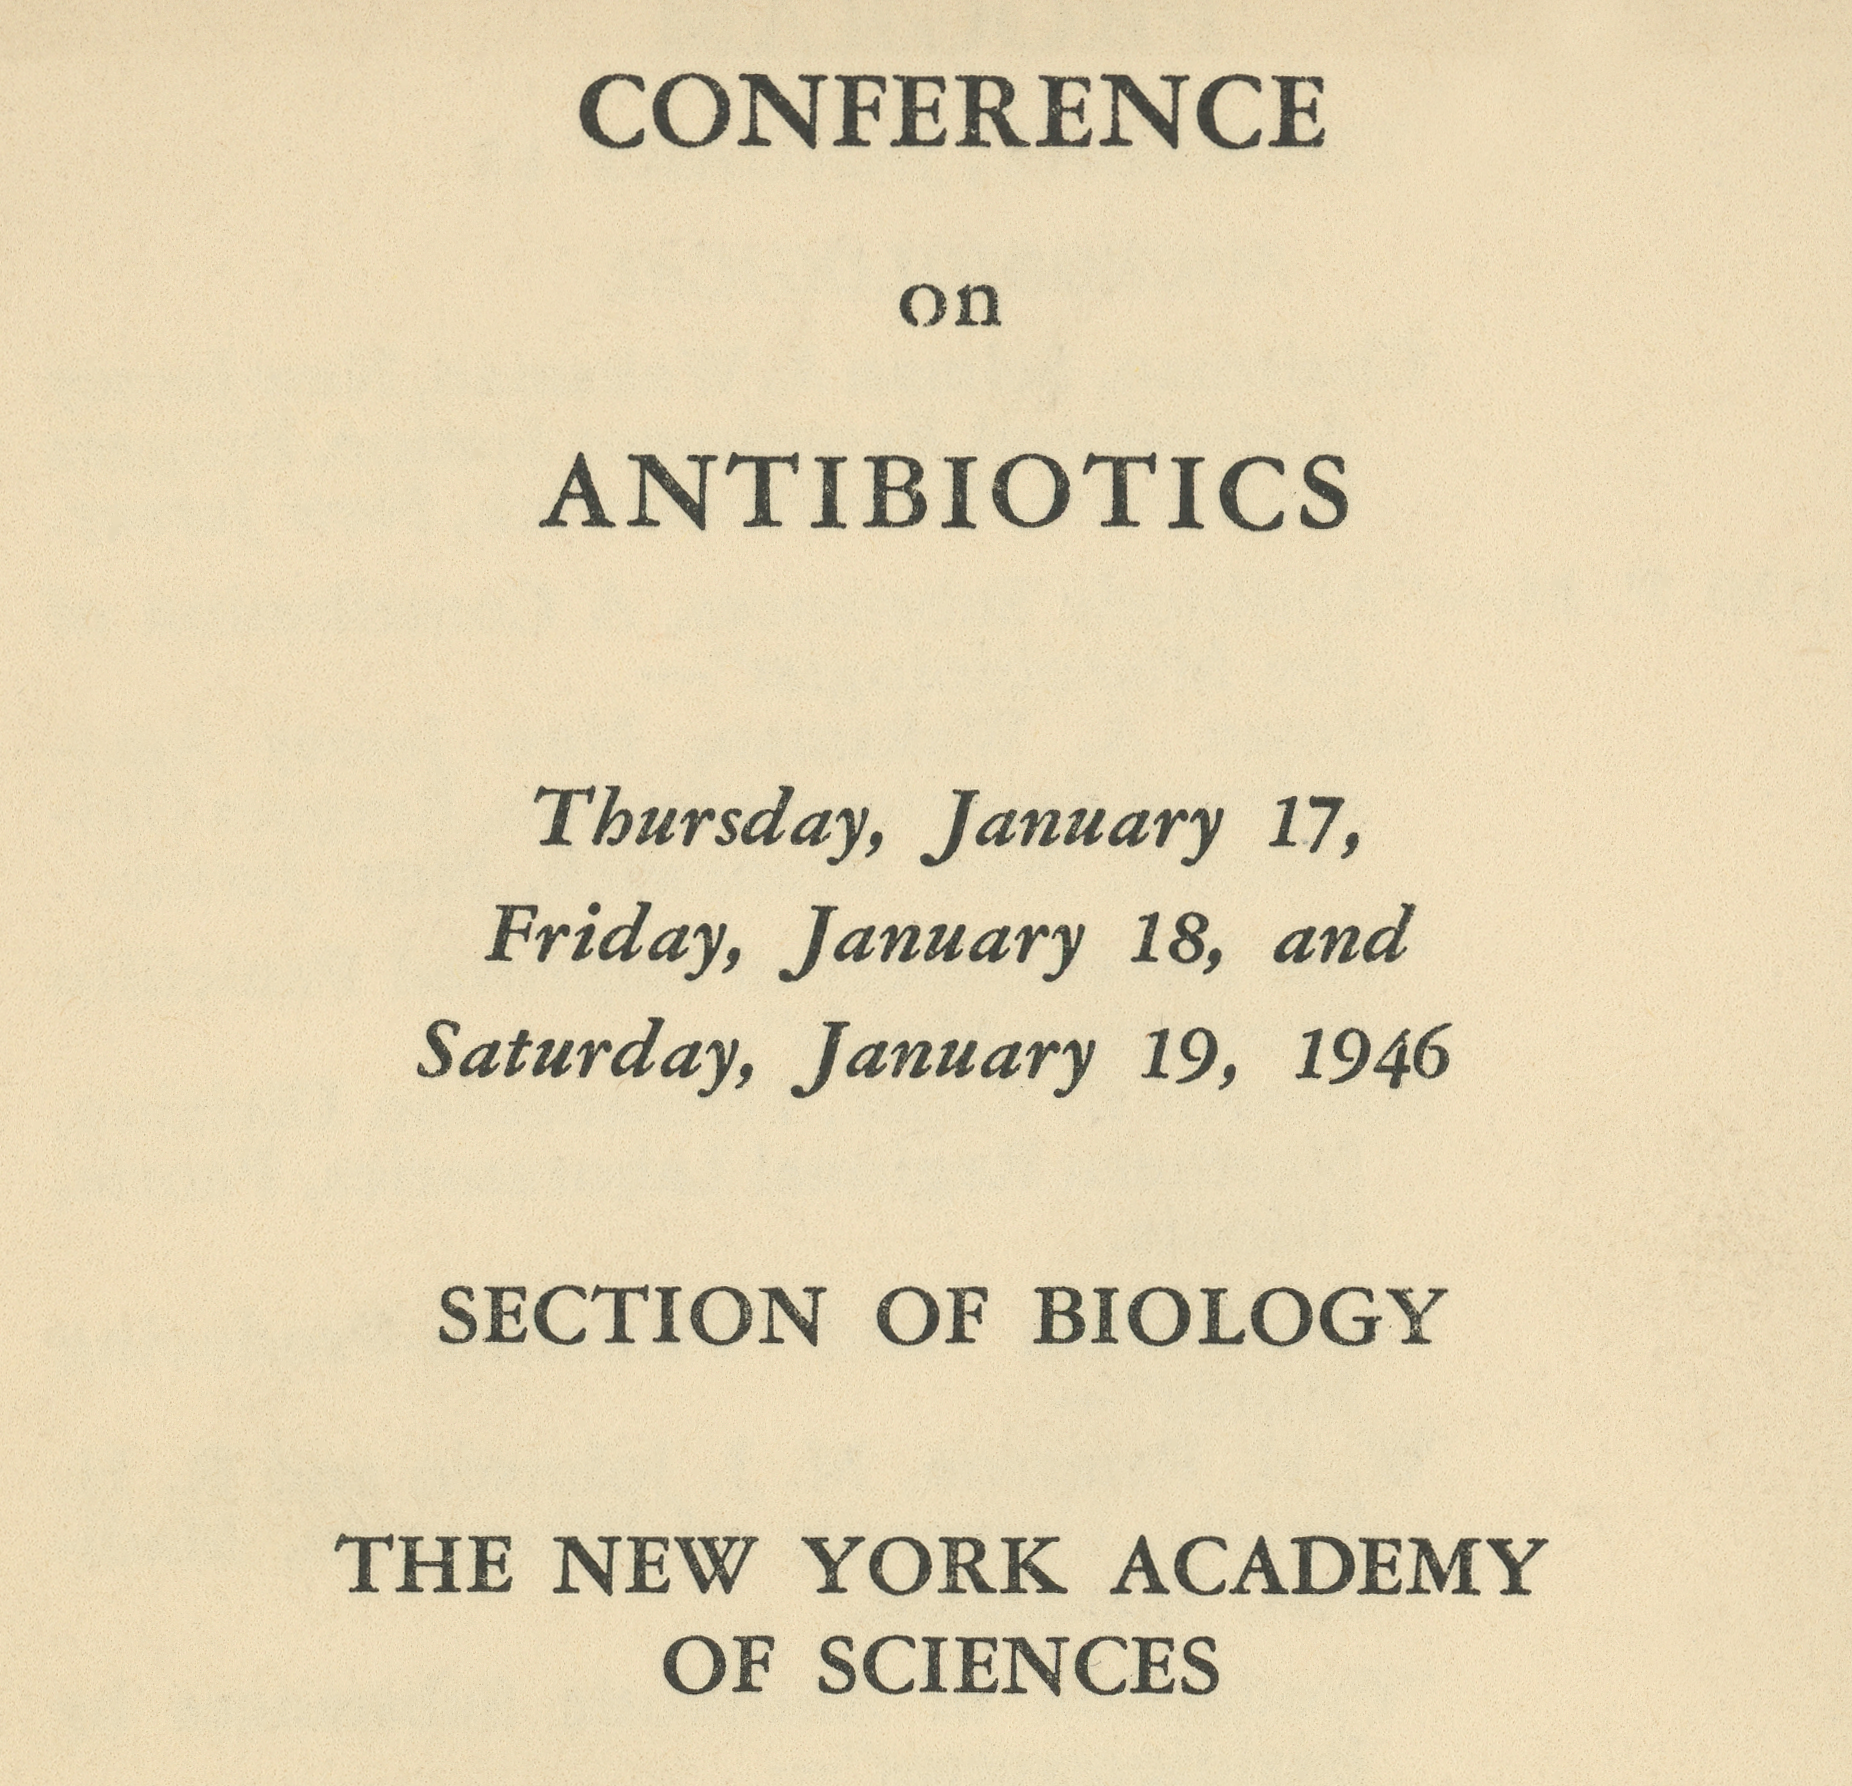 An advert for a 1946 antibiotics conference sponsored by the Academy.